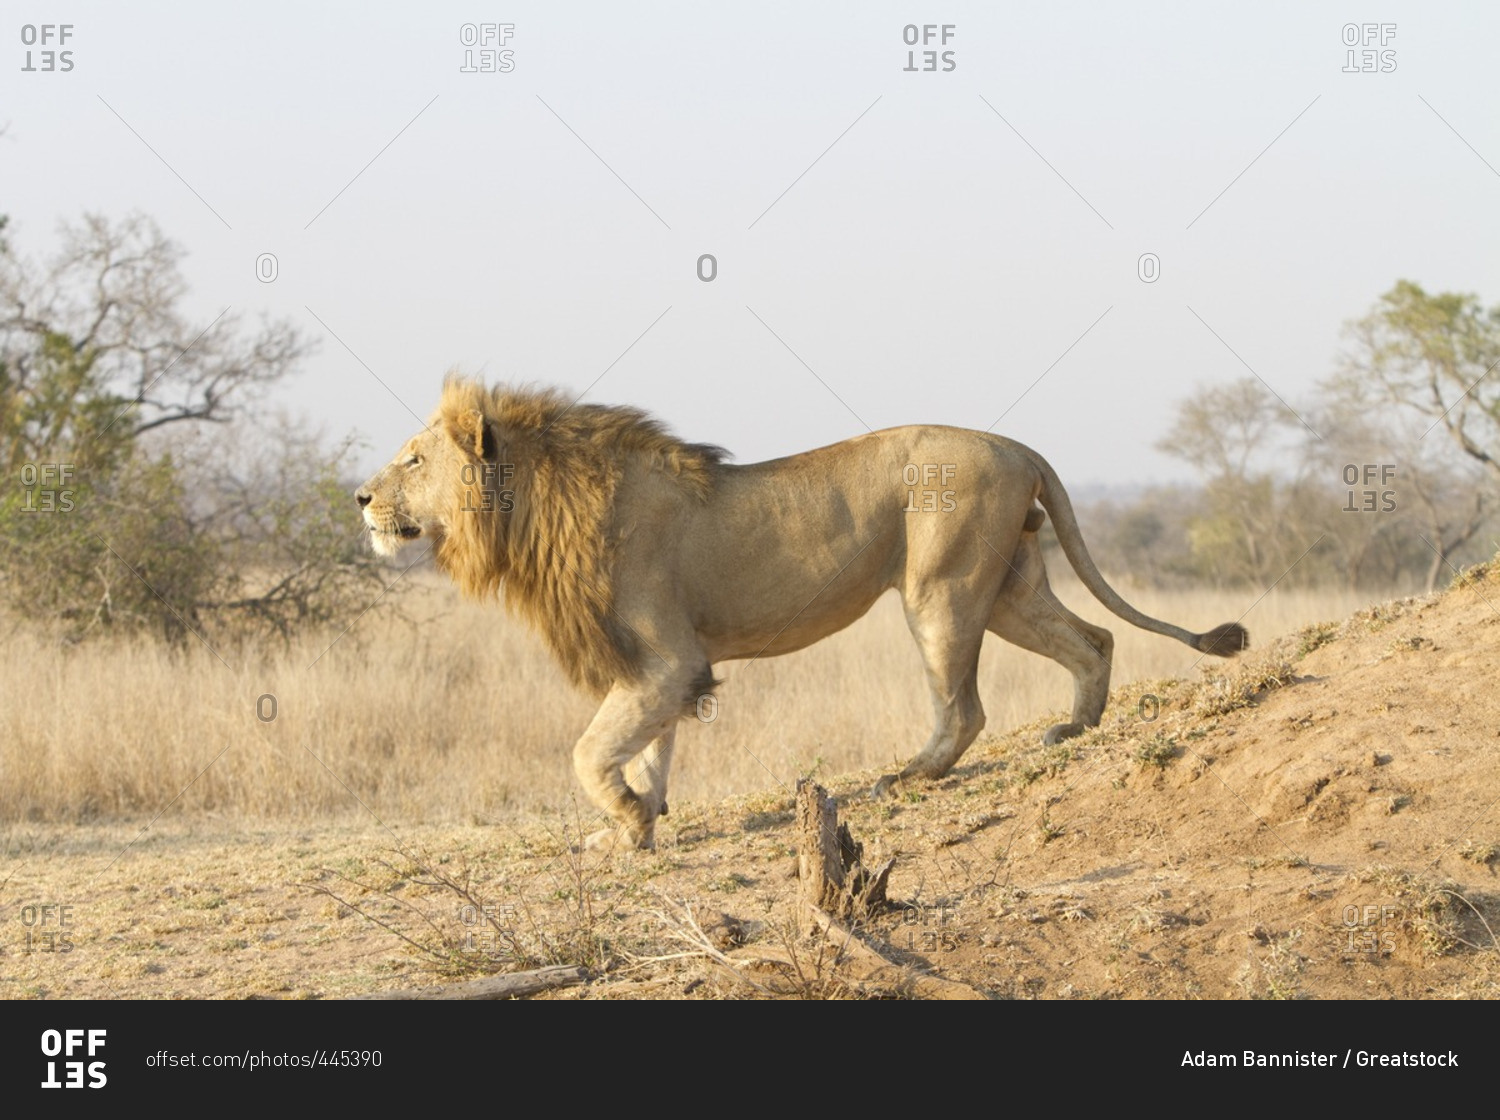 A male lion coming down termite mound, South Africa